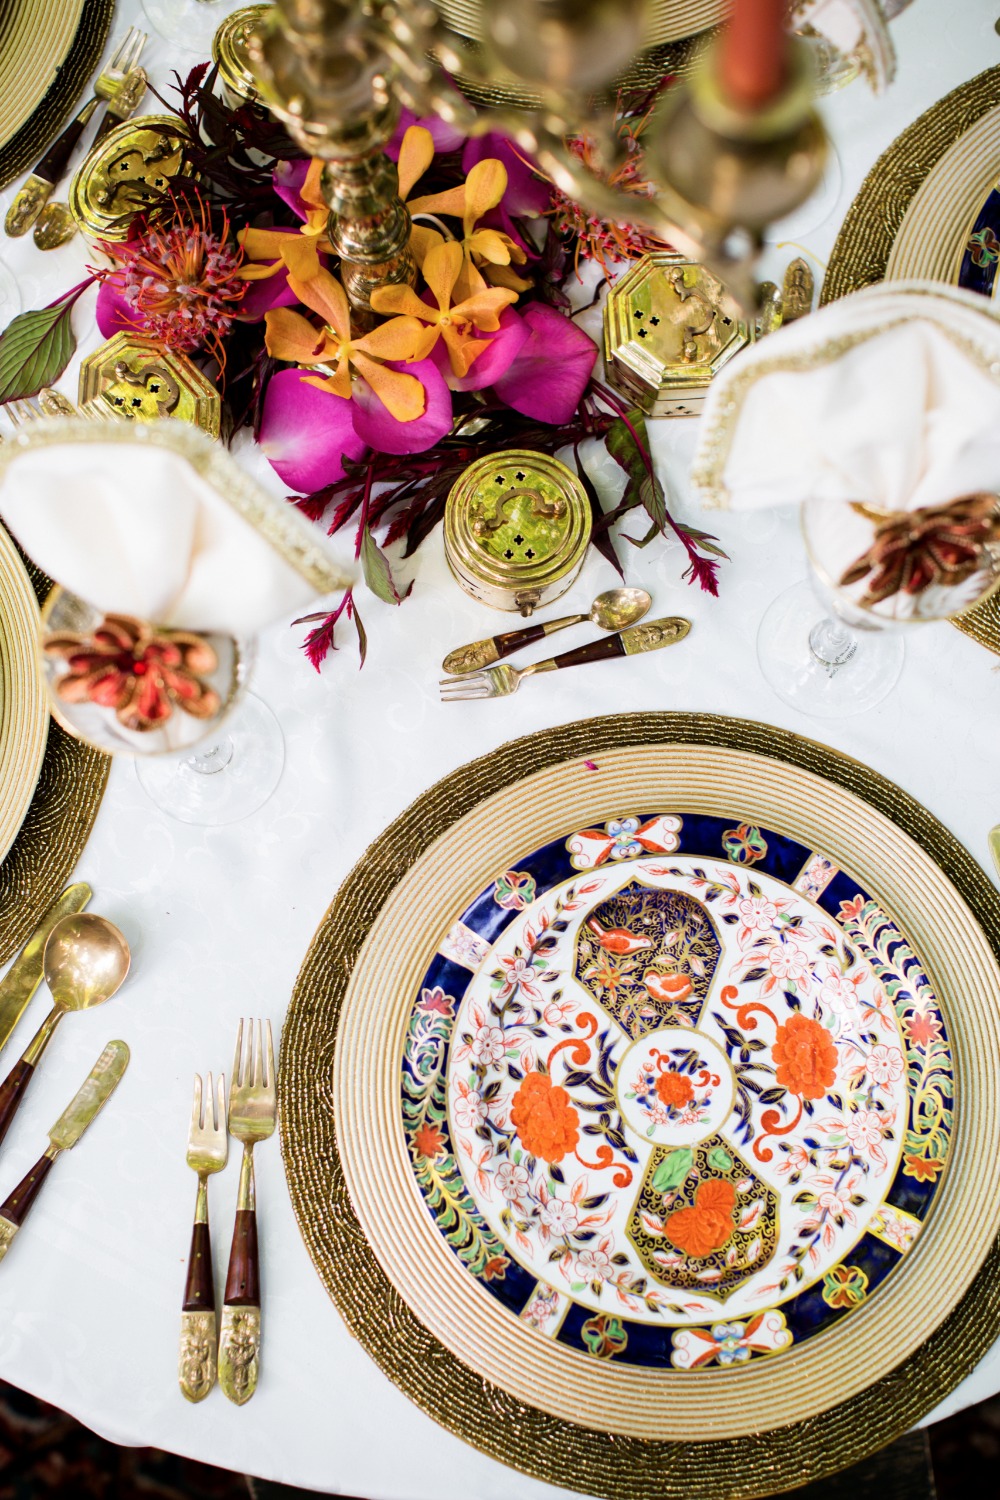 Eclectic details for your wedding table